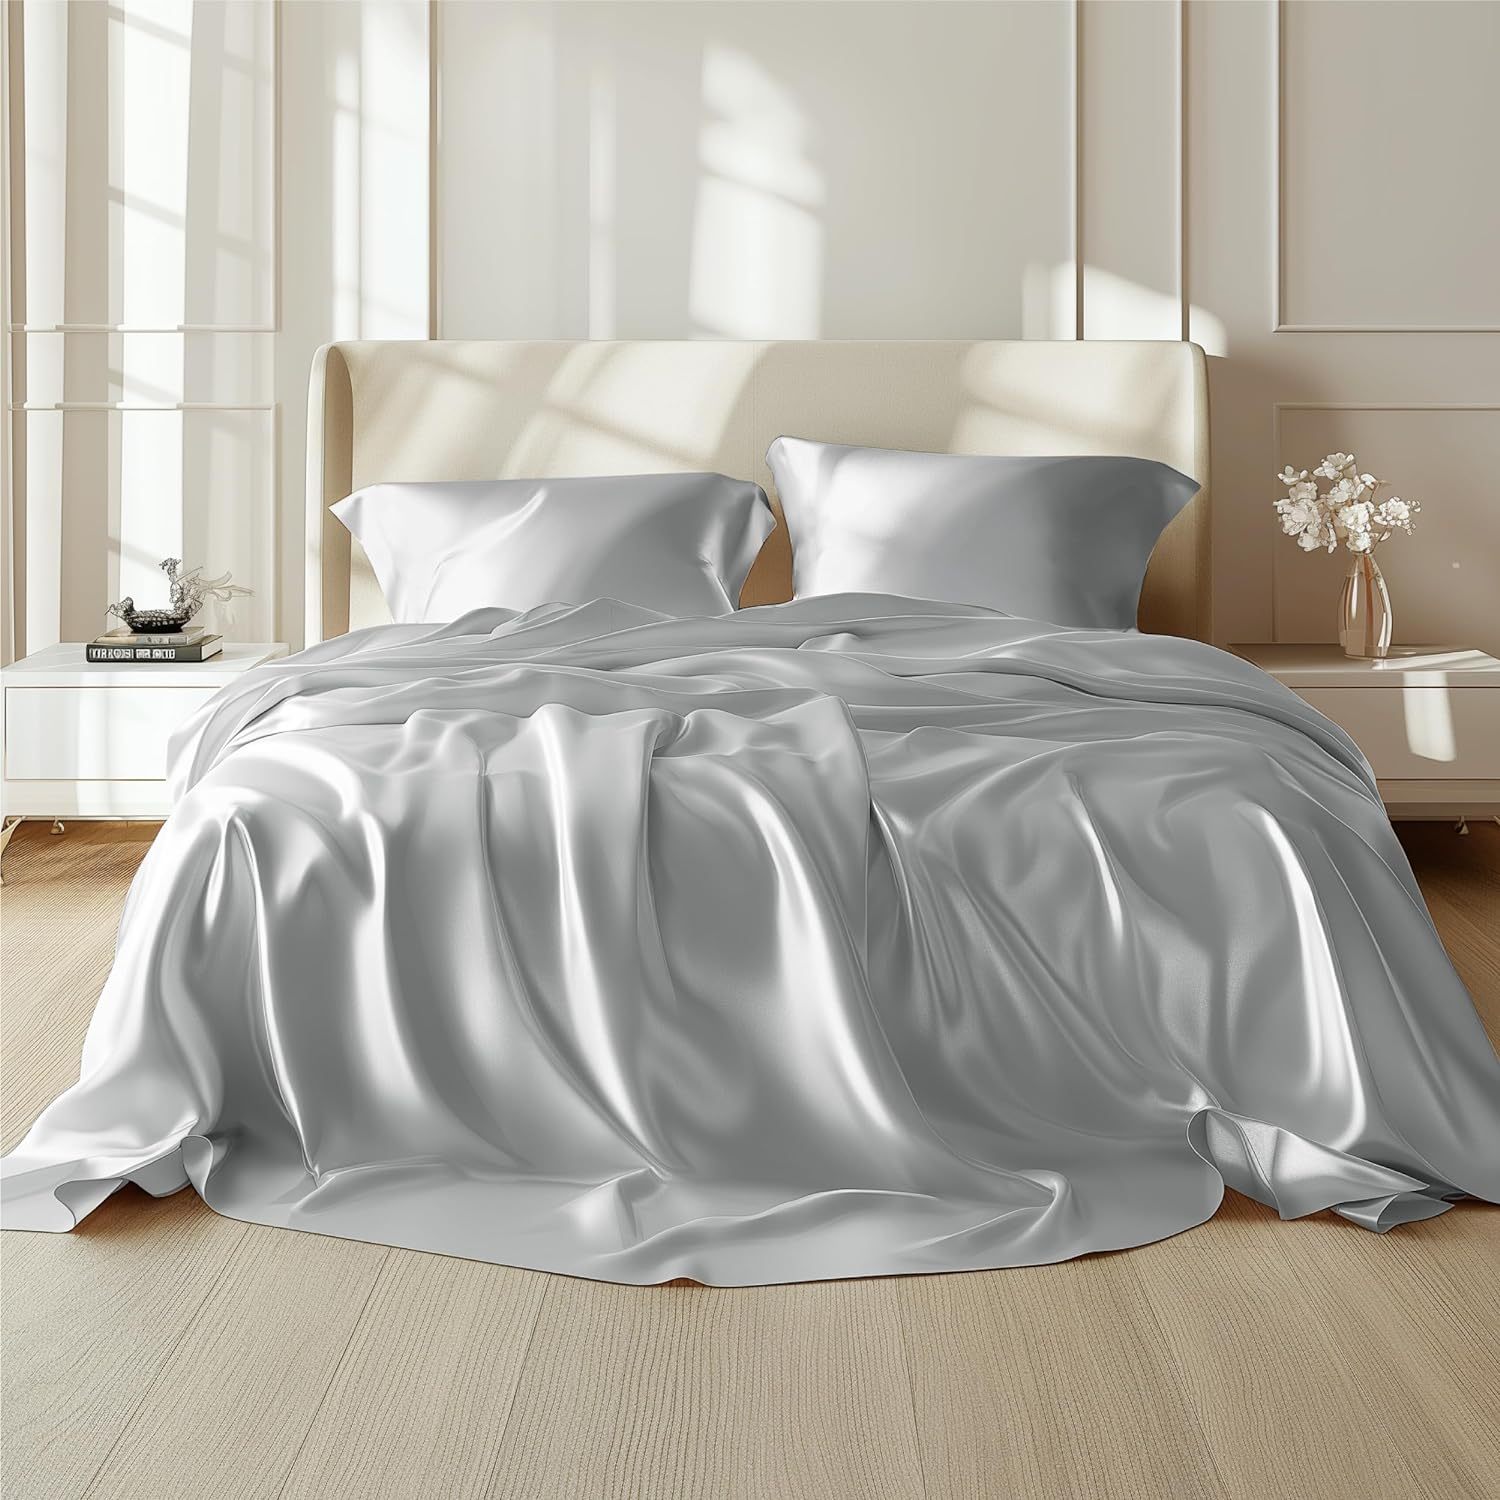 

Bedsure Soft Satin Sheets - 3 Pcs Luxury Silky Sheets, Similar To Silk Sheets, Satin Sheets For Hair And Skin, Gifts For Women